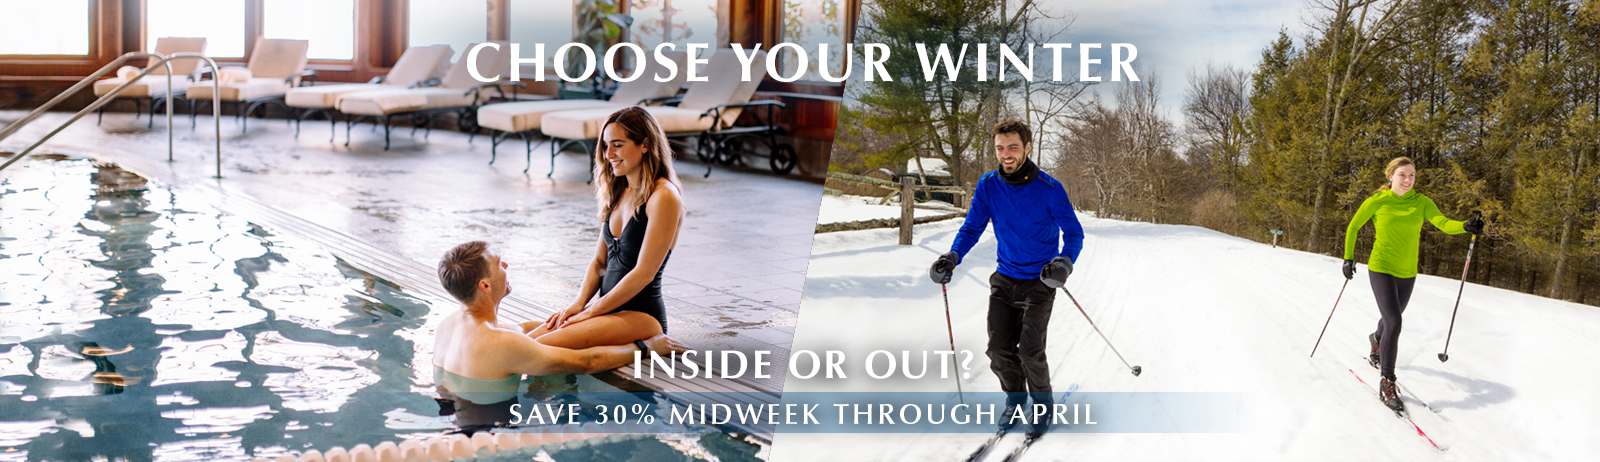 Choose Your Winter Promo at Mohonk